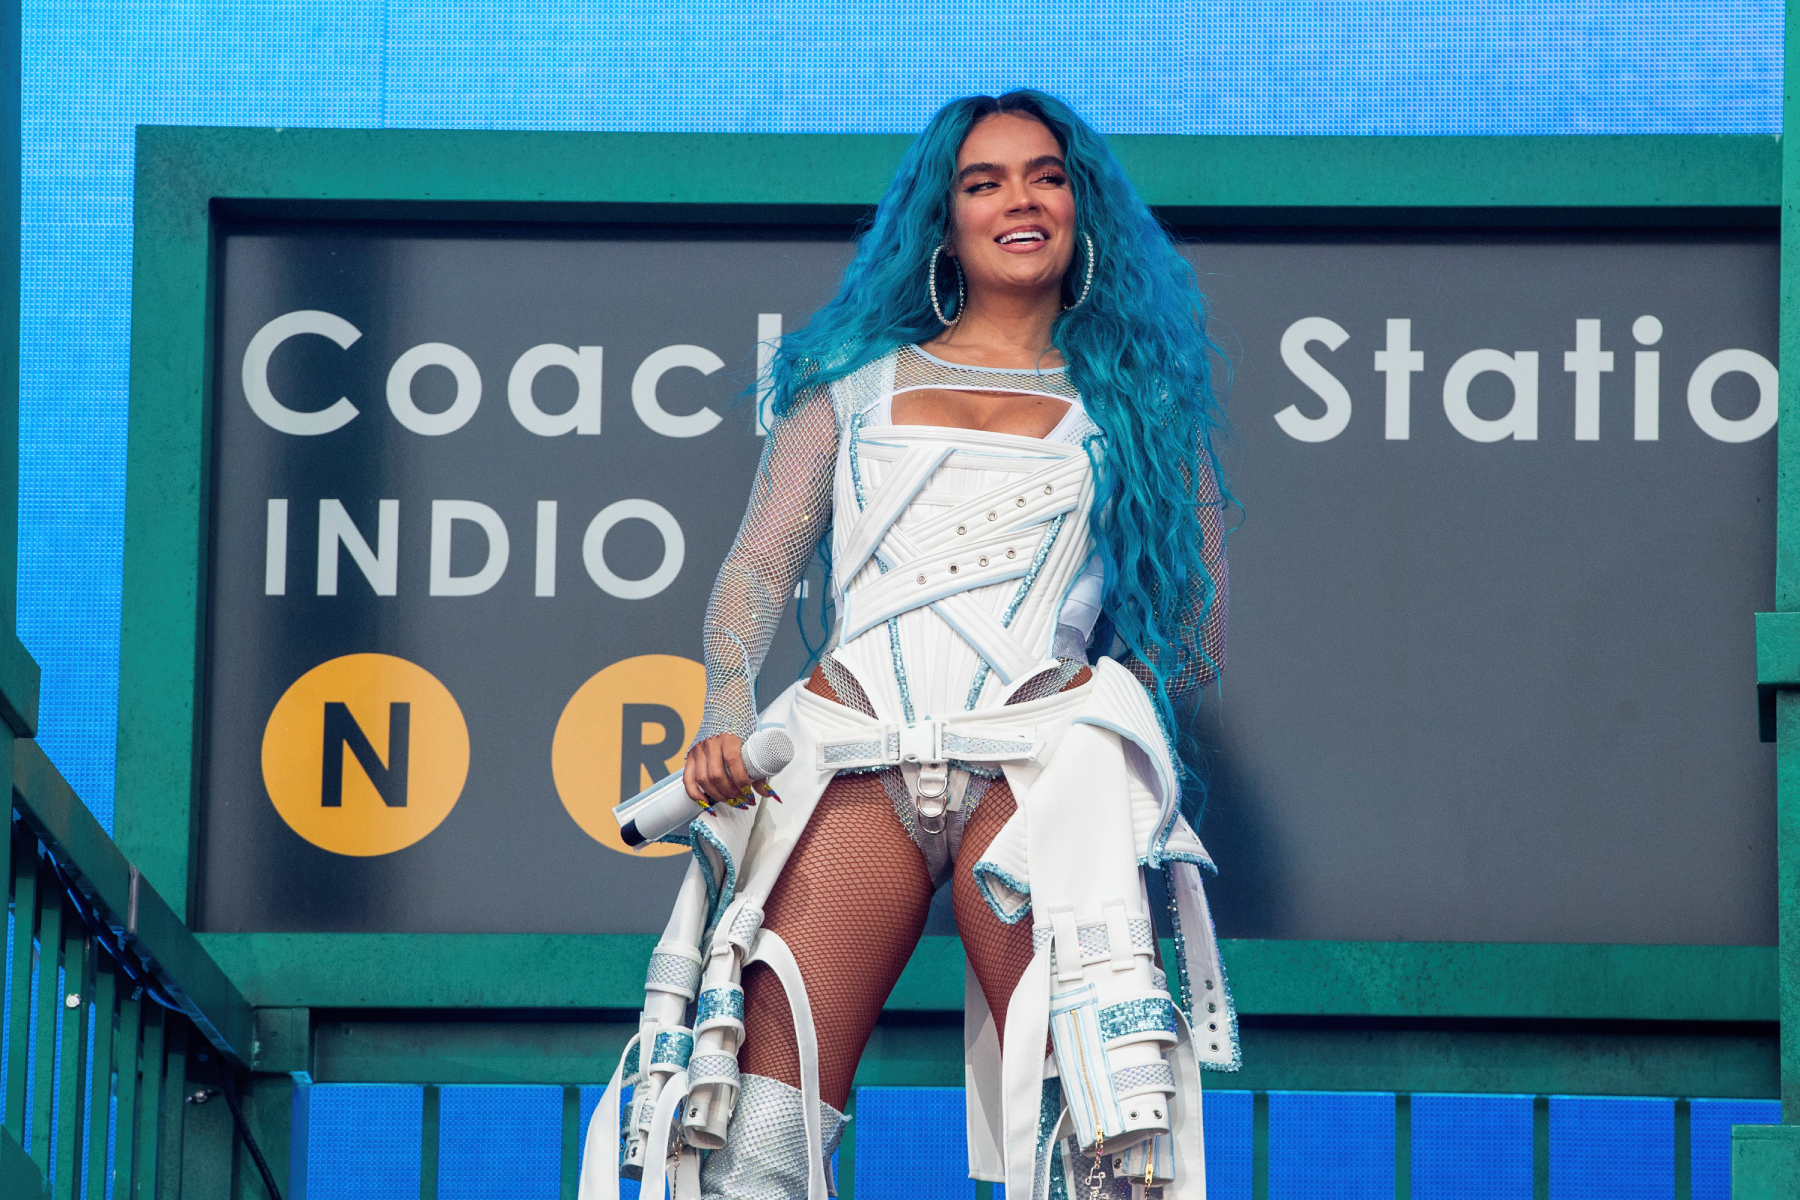 Karol G to Embark on $trip Love Tour After Successful Coachella